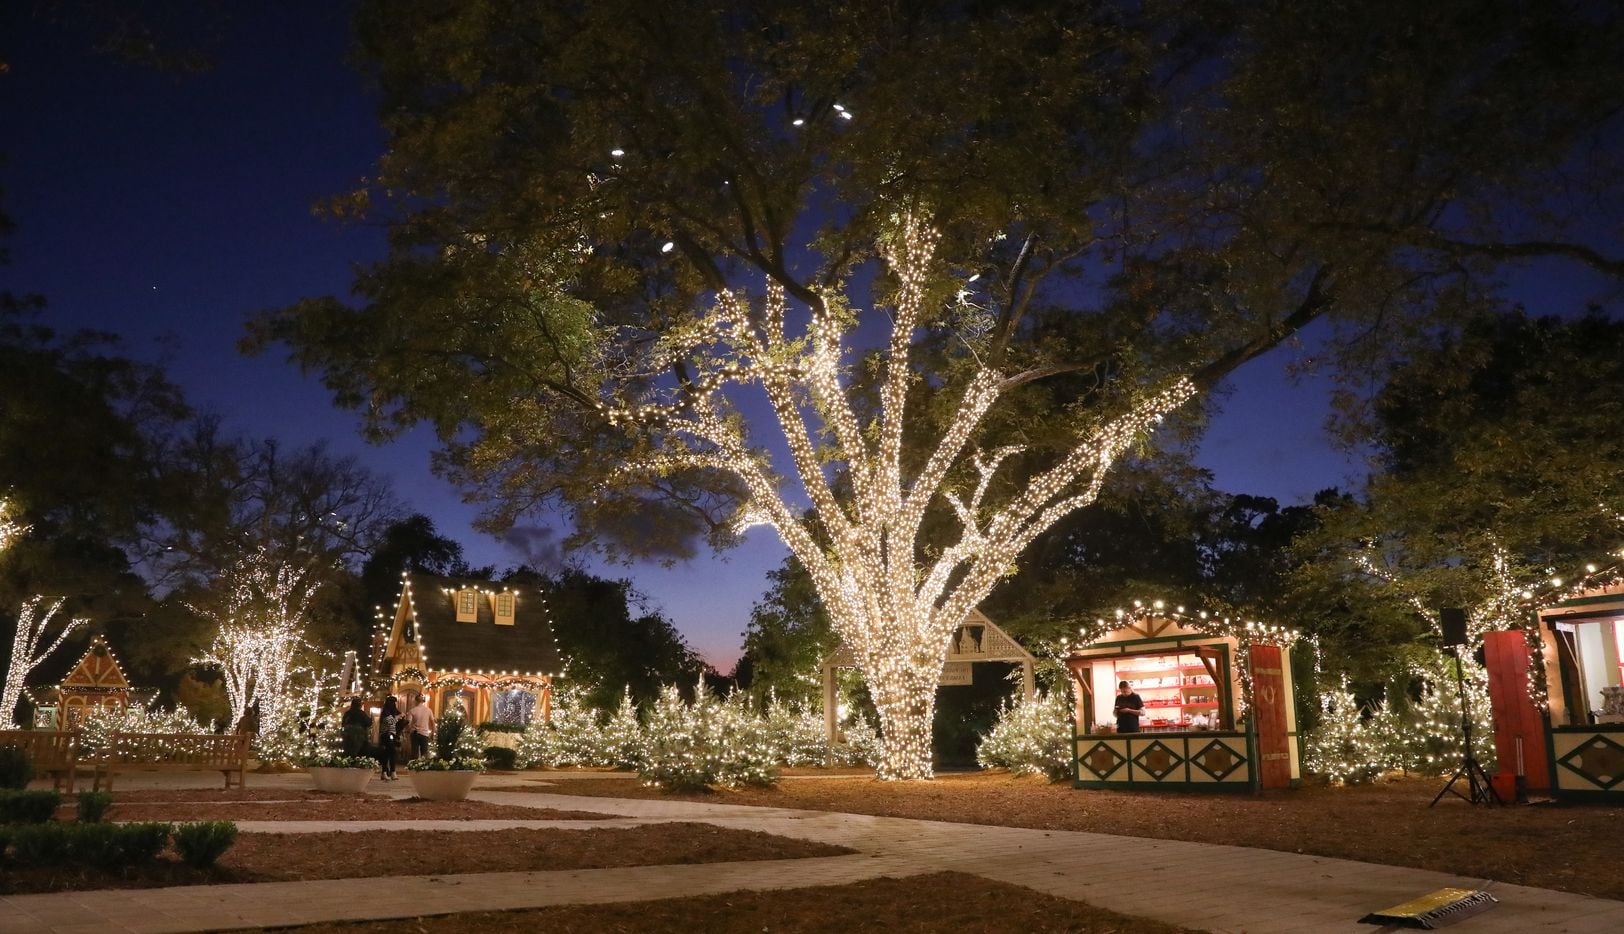 Visit the Dallas Arboretum day or night to walk through the “12 Days of Christmas” holiday exhibit, check out the Christmas Village with a 23-foot-tall wooden Christmas pyramid, and see a 50-foot-tall tree with more than 42,000 lights playing holiday tunes.